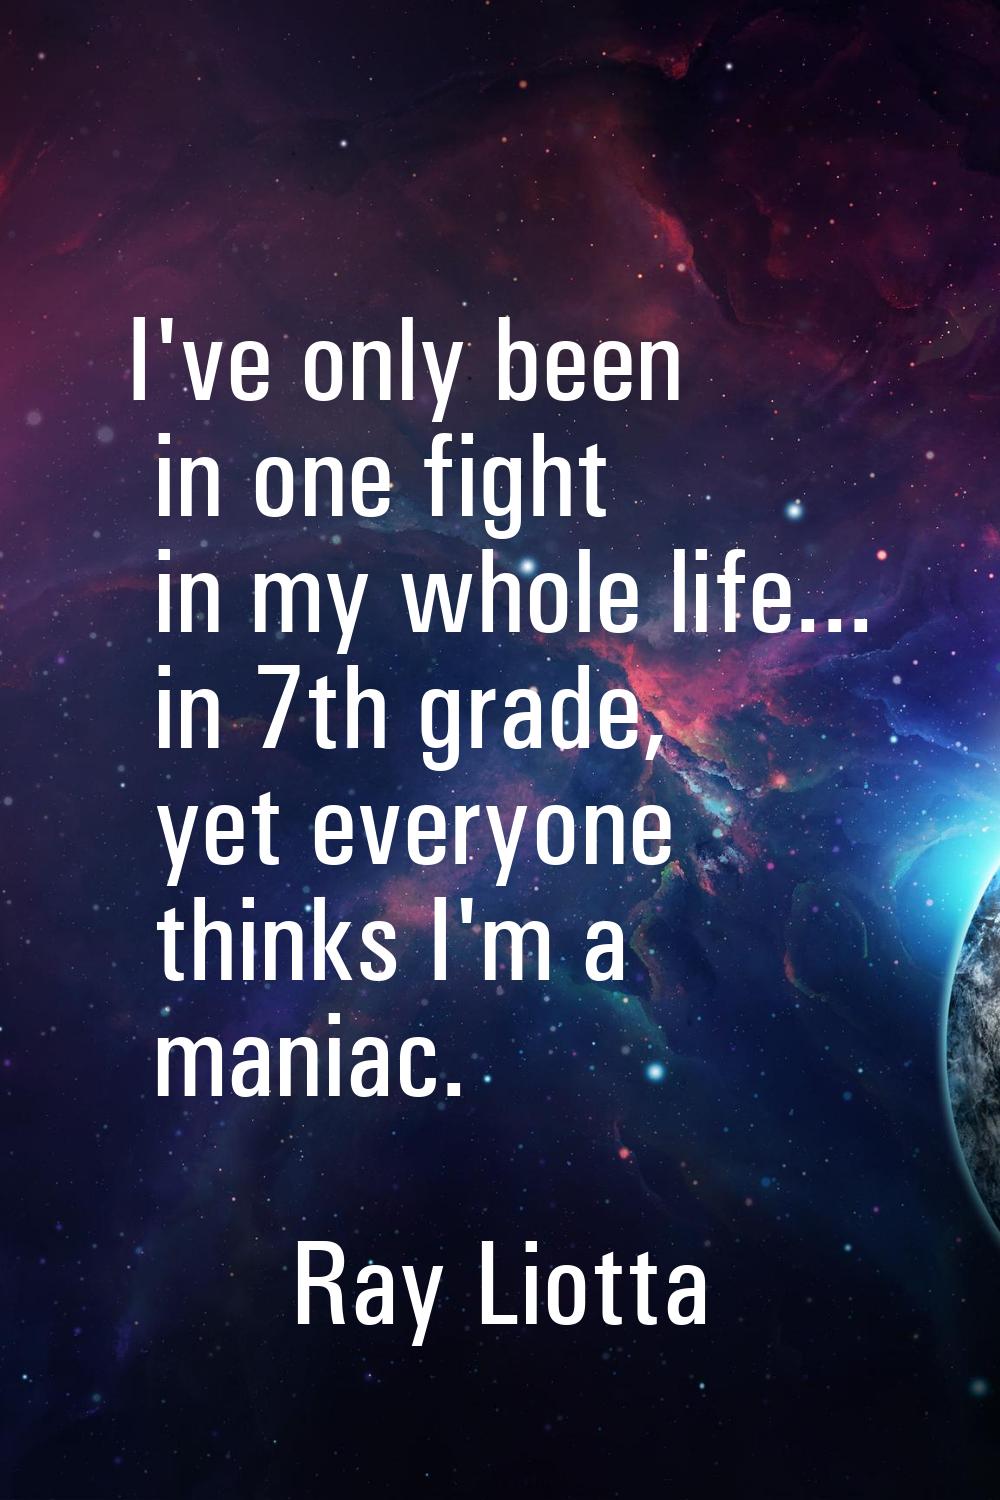 I've only been in one fight in my whole life... in 7th grade, yet everyone thinks I'm a maniac.